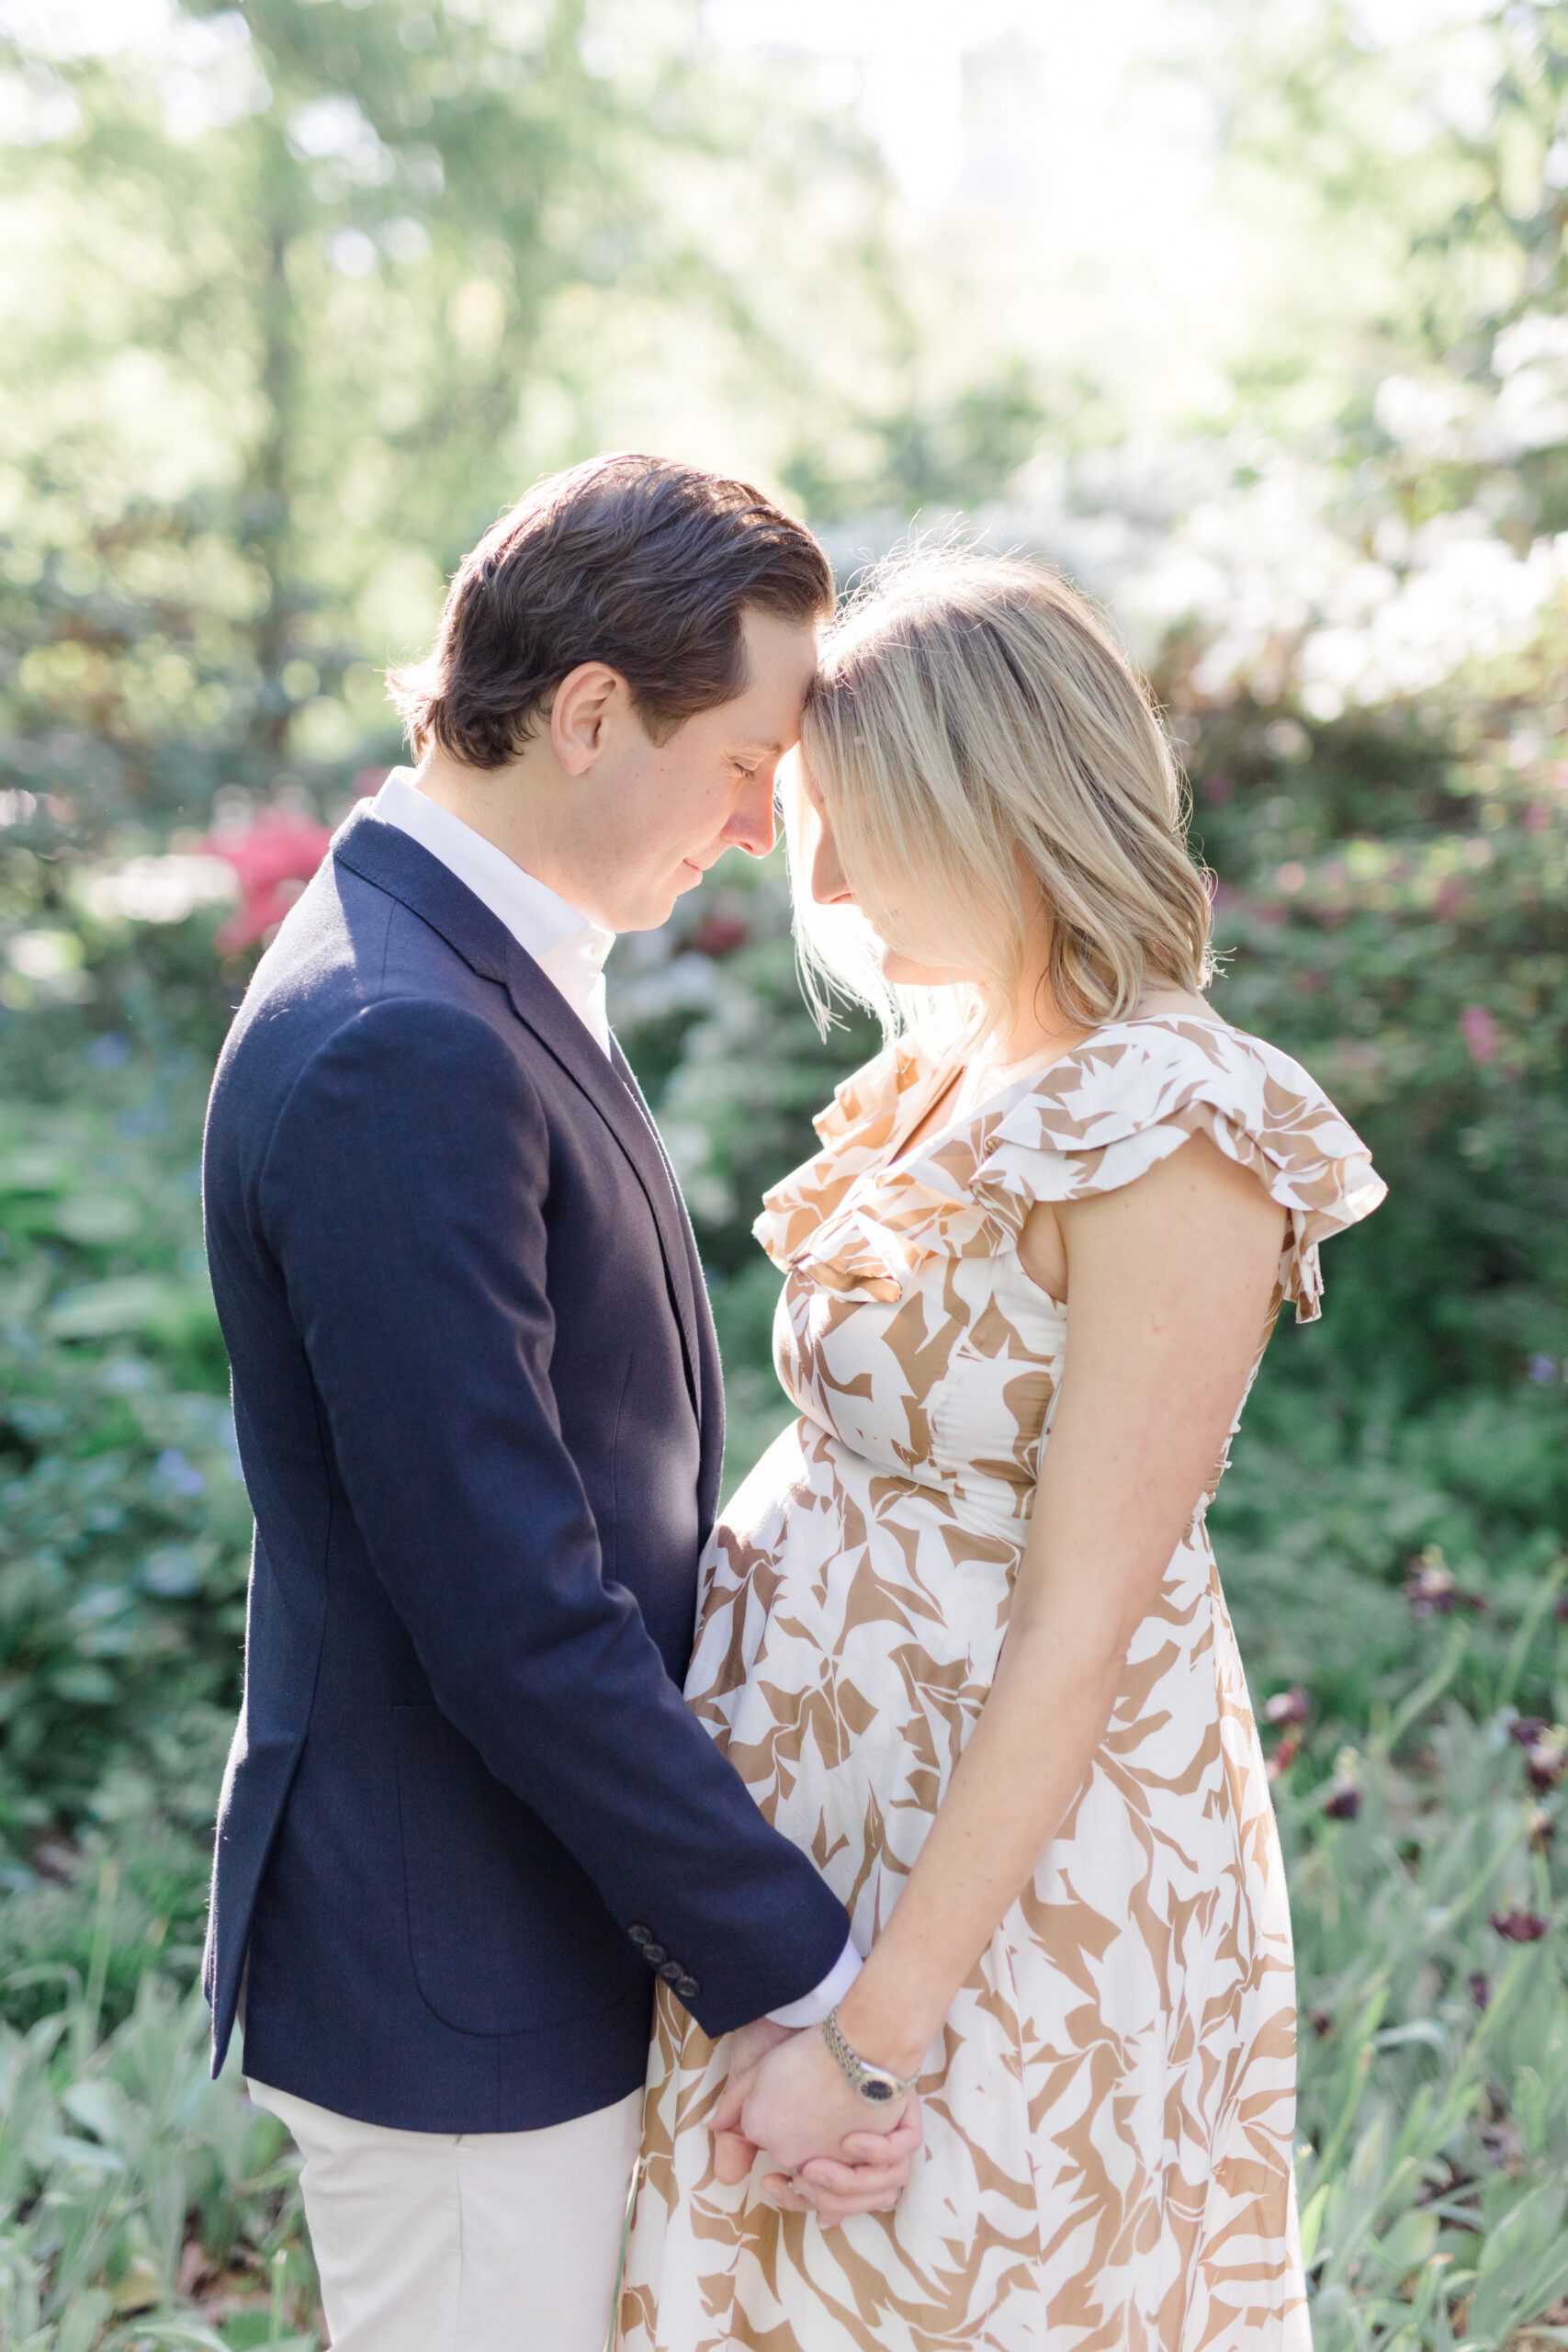 An expecting mom and her husband touch foreheads and hold hands at a maternity photo session in Central Park shot by Jacqueline Clair Photography